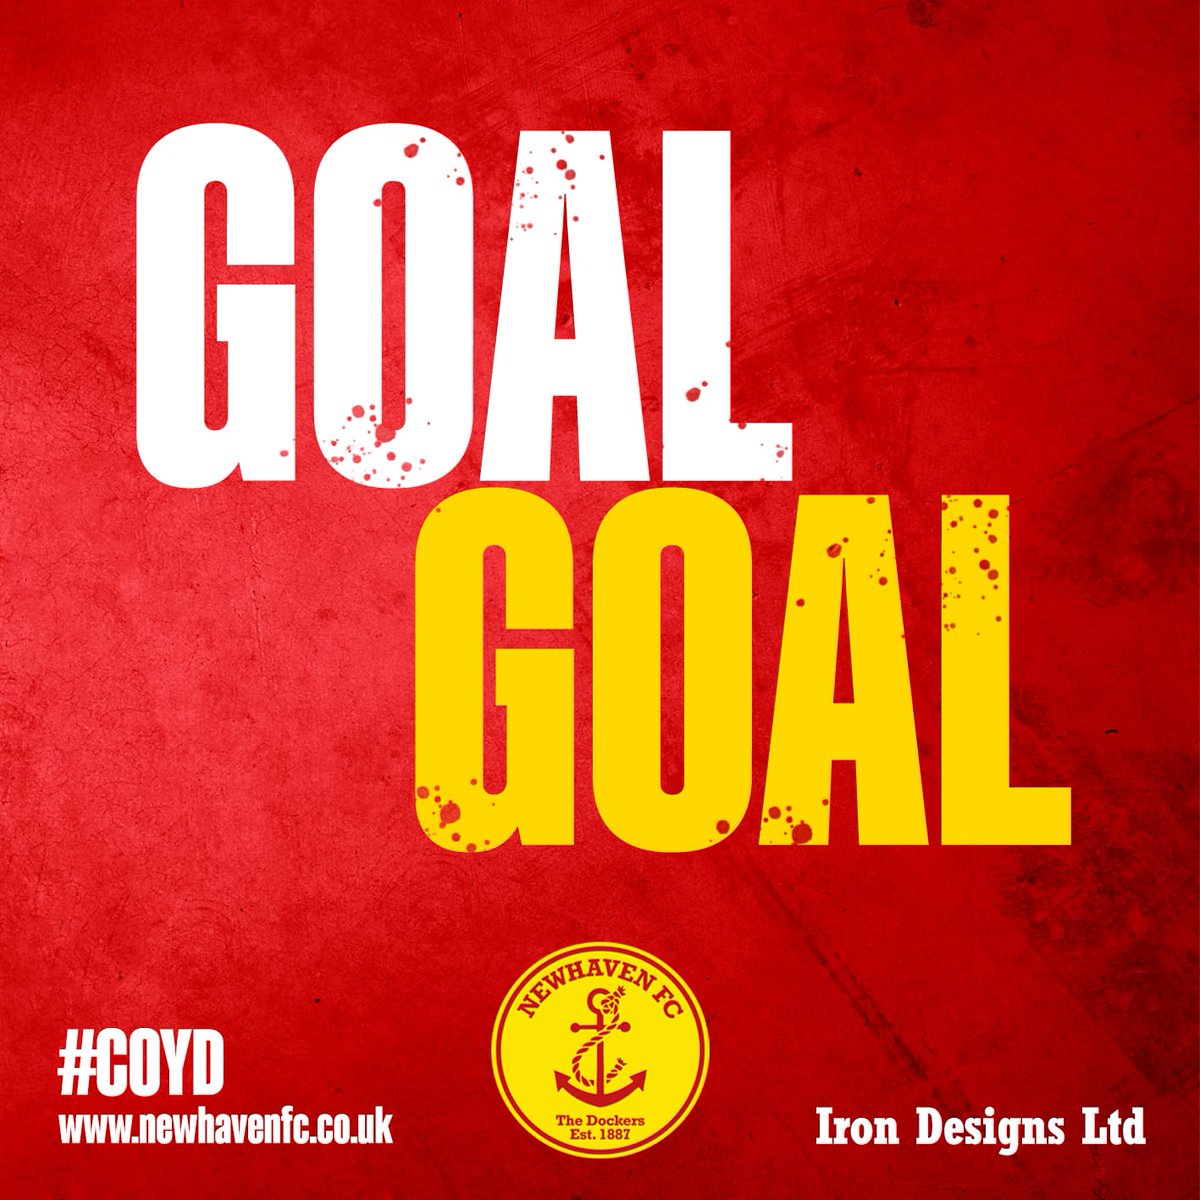 62 mins
Hassocks extend their lead again.
Still hard to argue with the scoreline. We've been so poor.
3-1